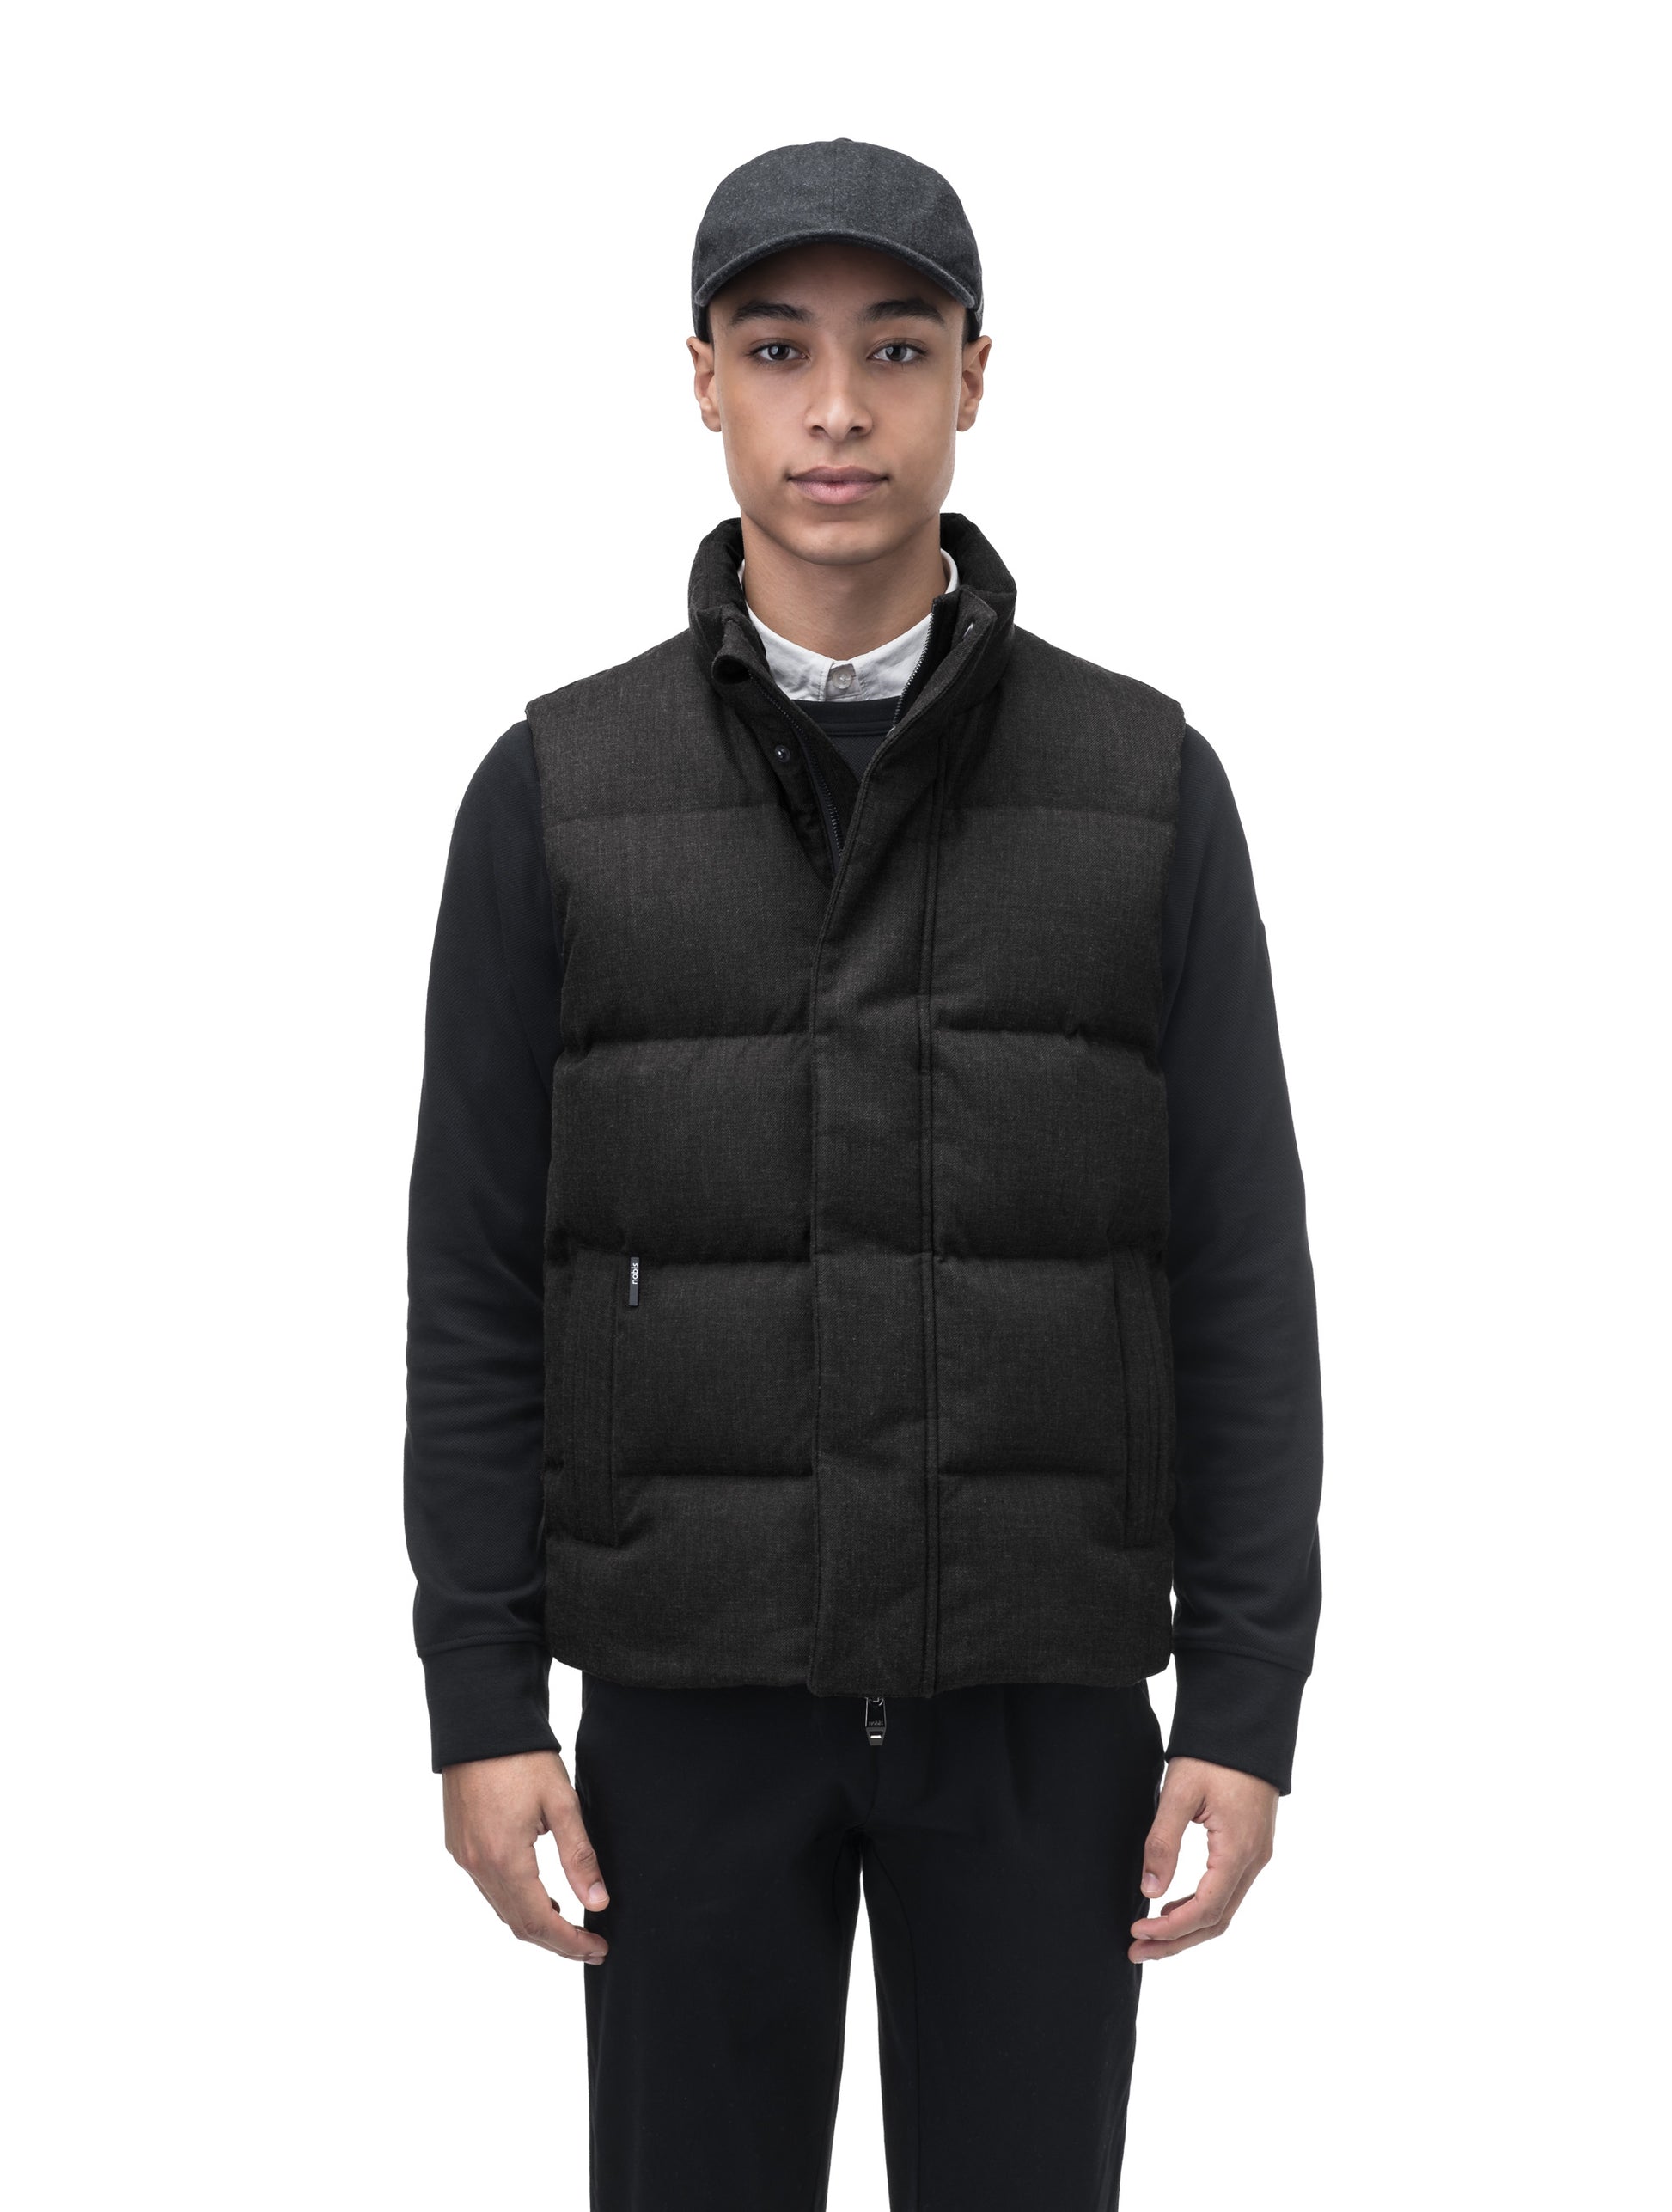 Vale Men's Quilted Vest in hip length, Canadian duck down insulation, and two-way zipper, in H. Black